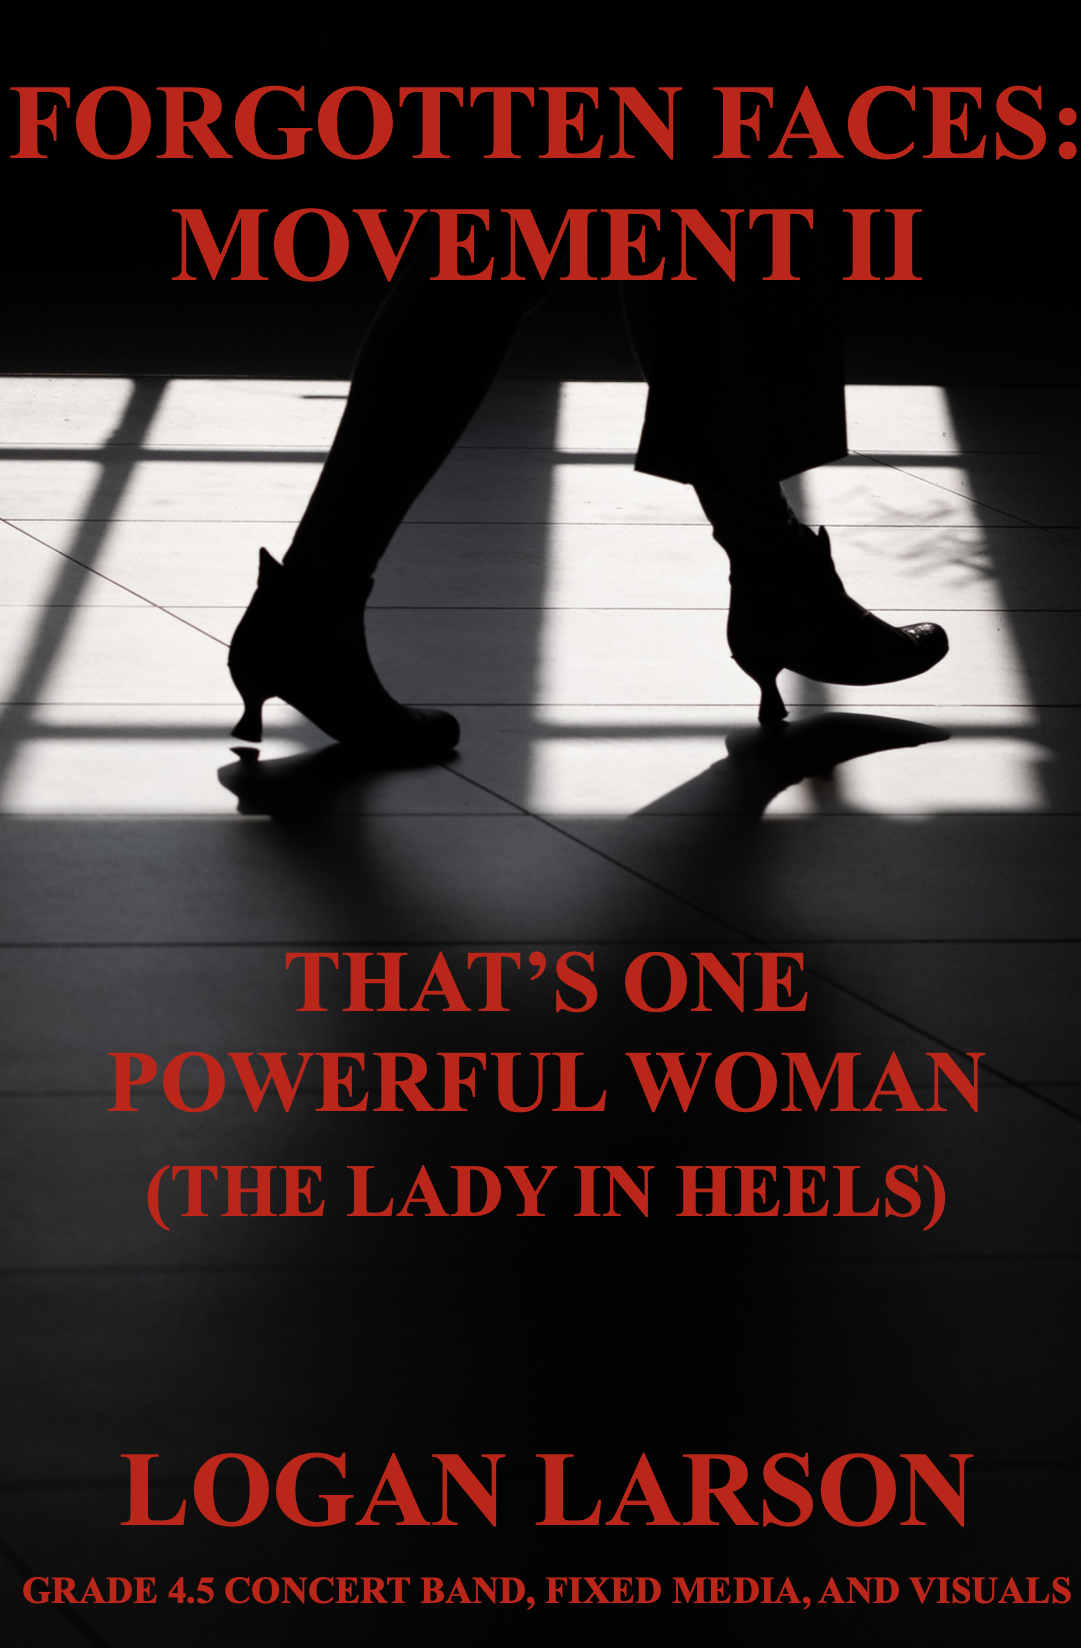 That's One Powerful Woman (Score Only) by Logan Larson